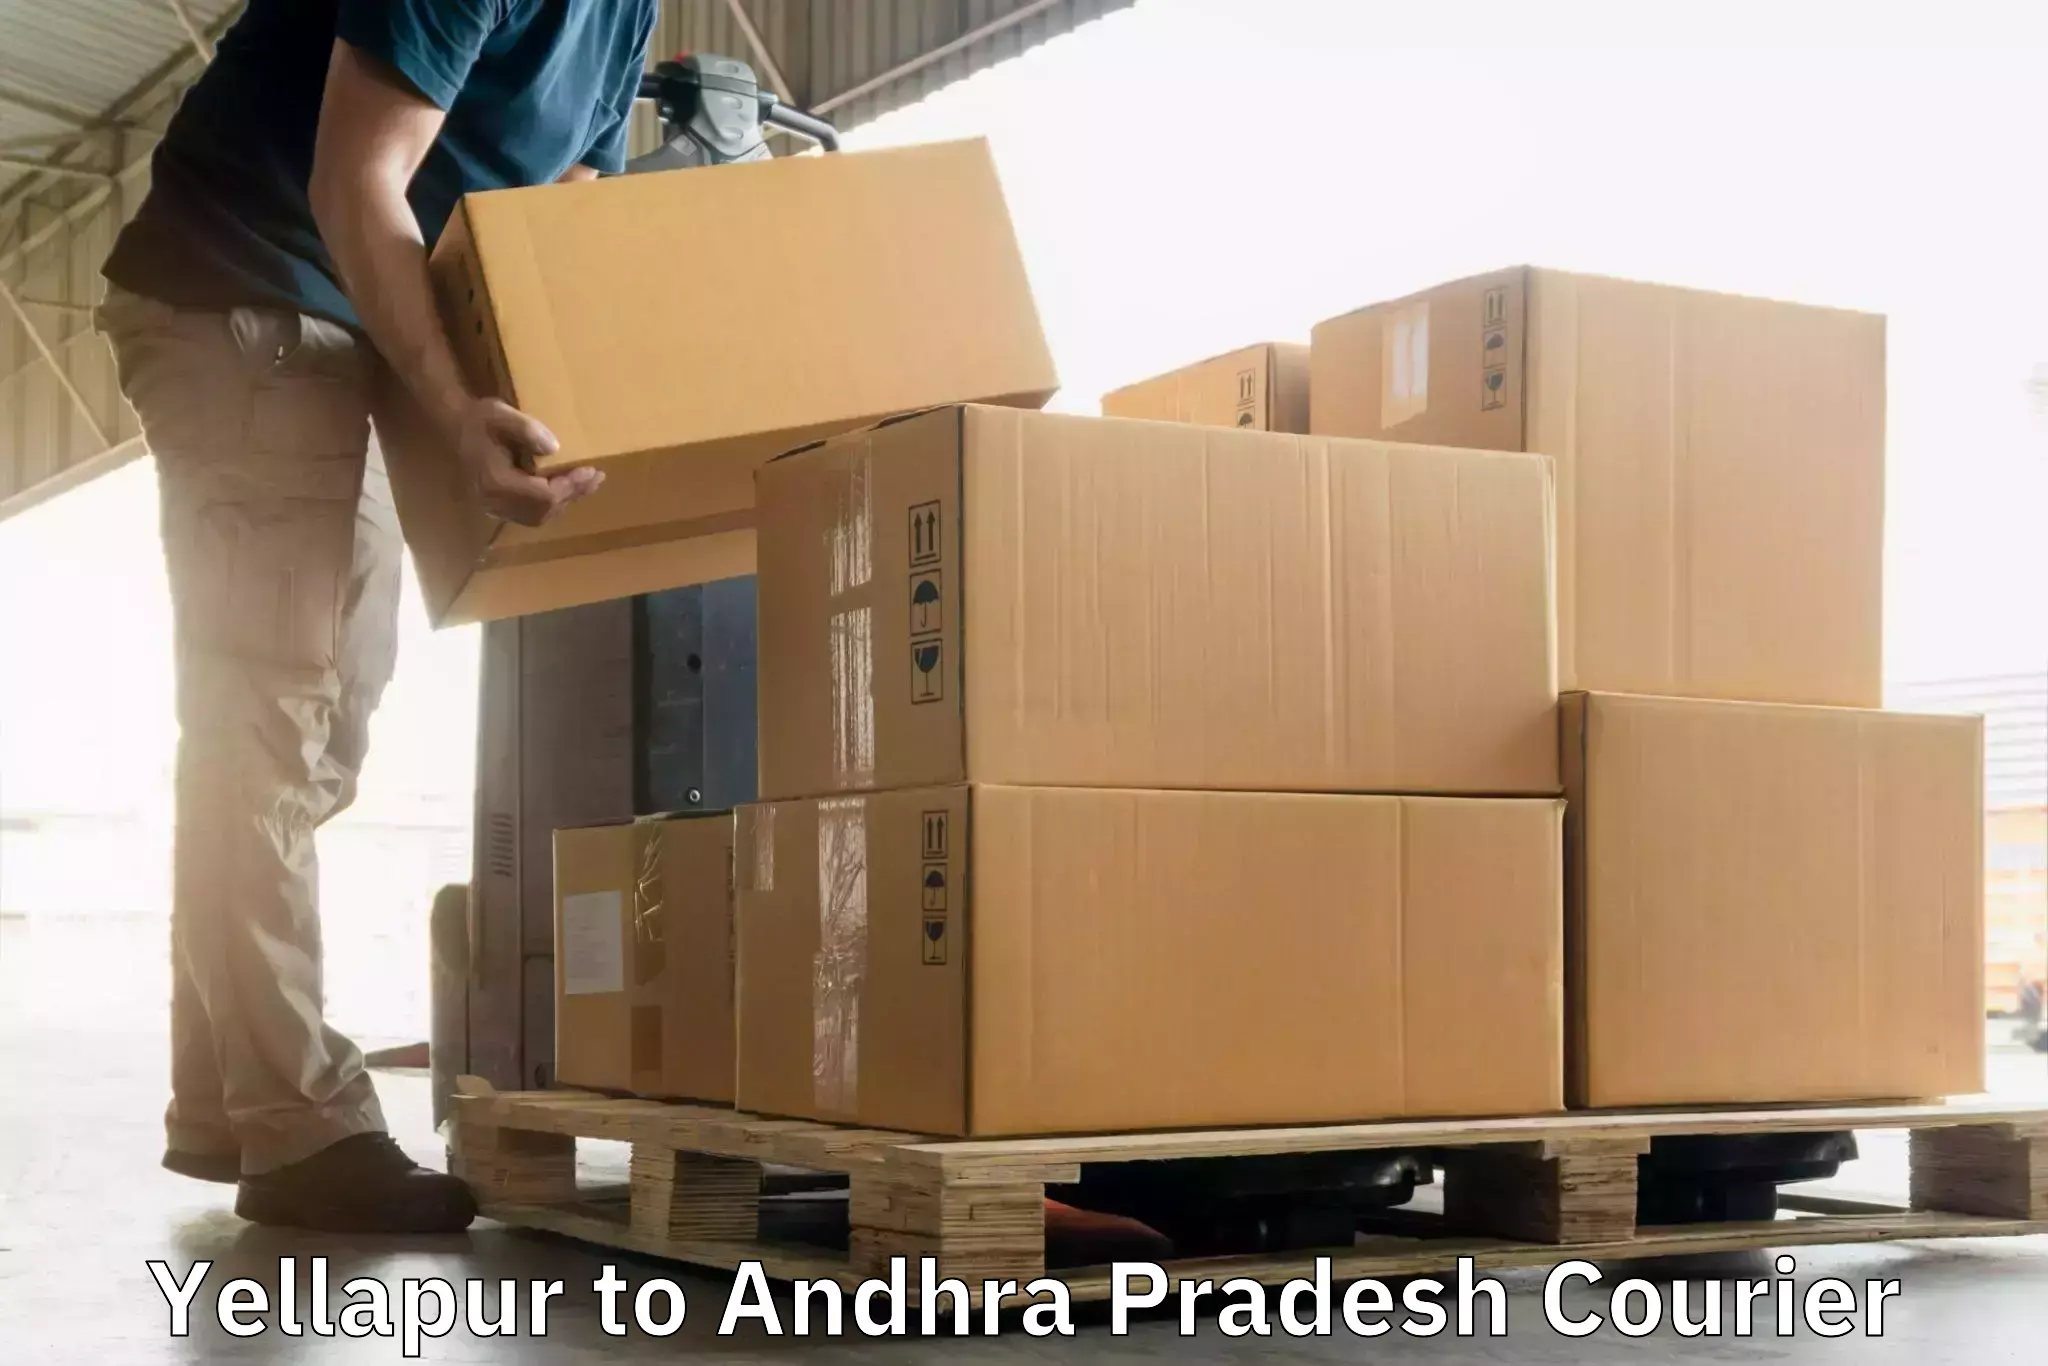 Small parcel delivery in Yellapur to Addanki